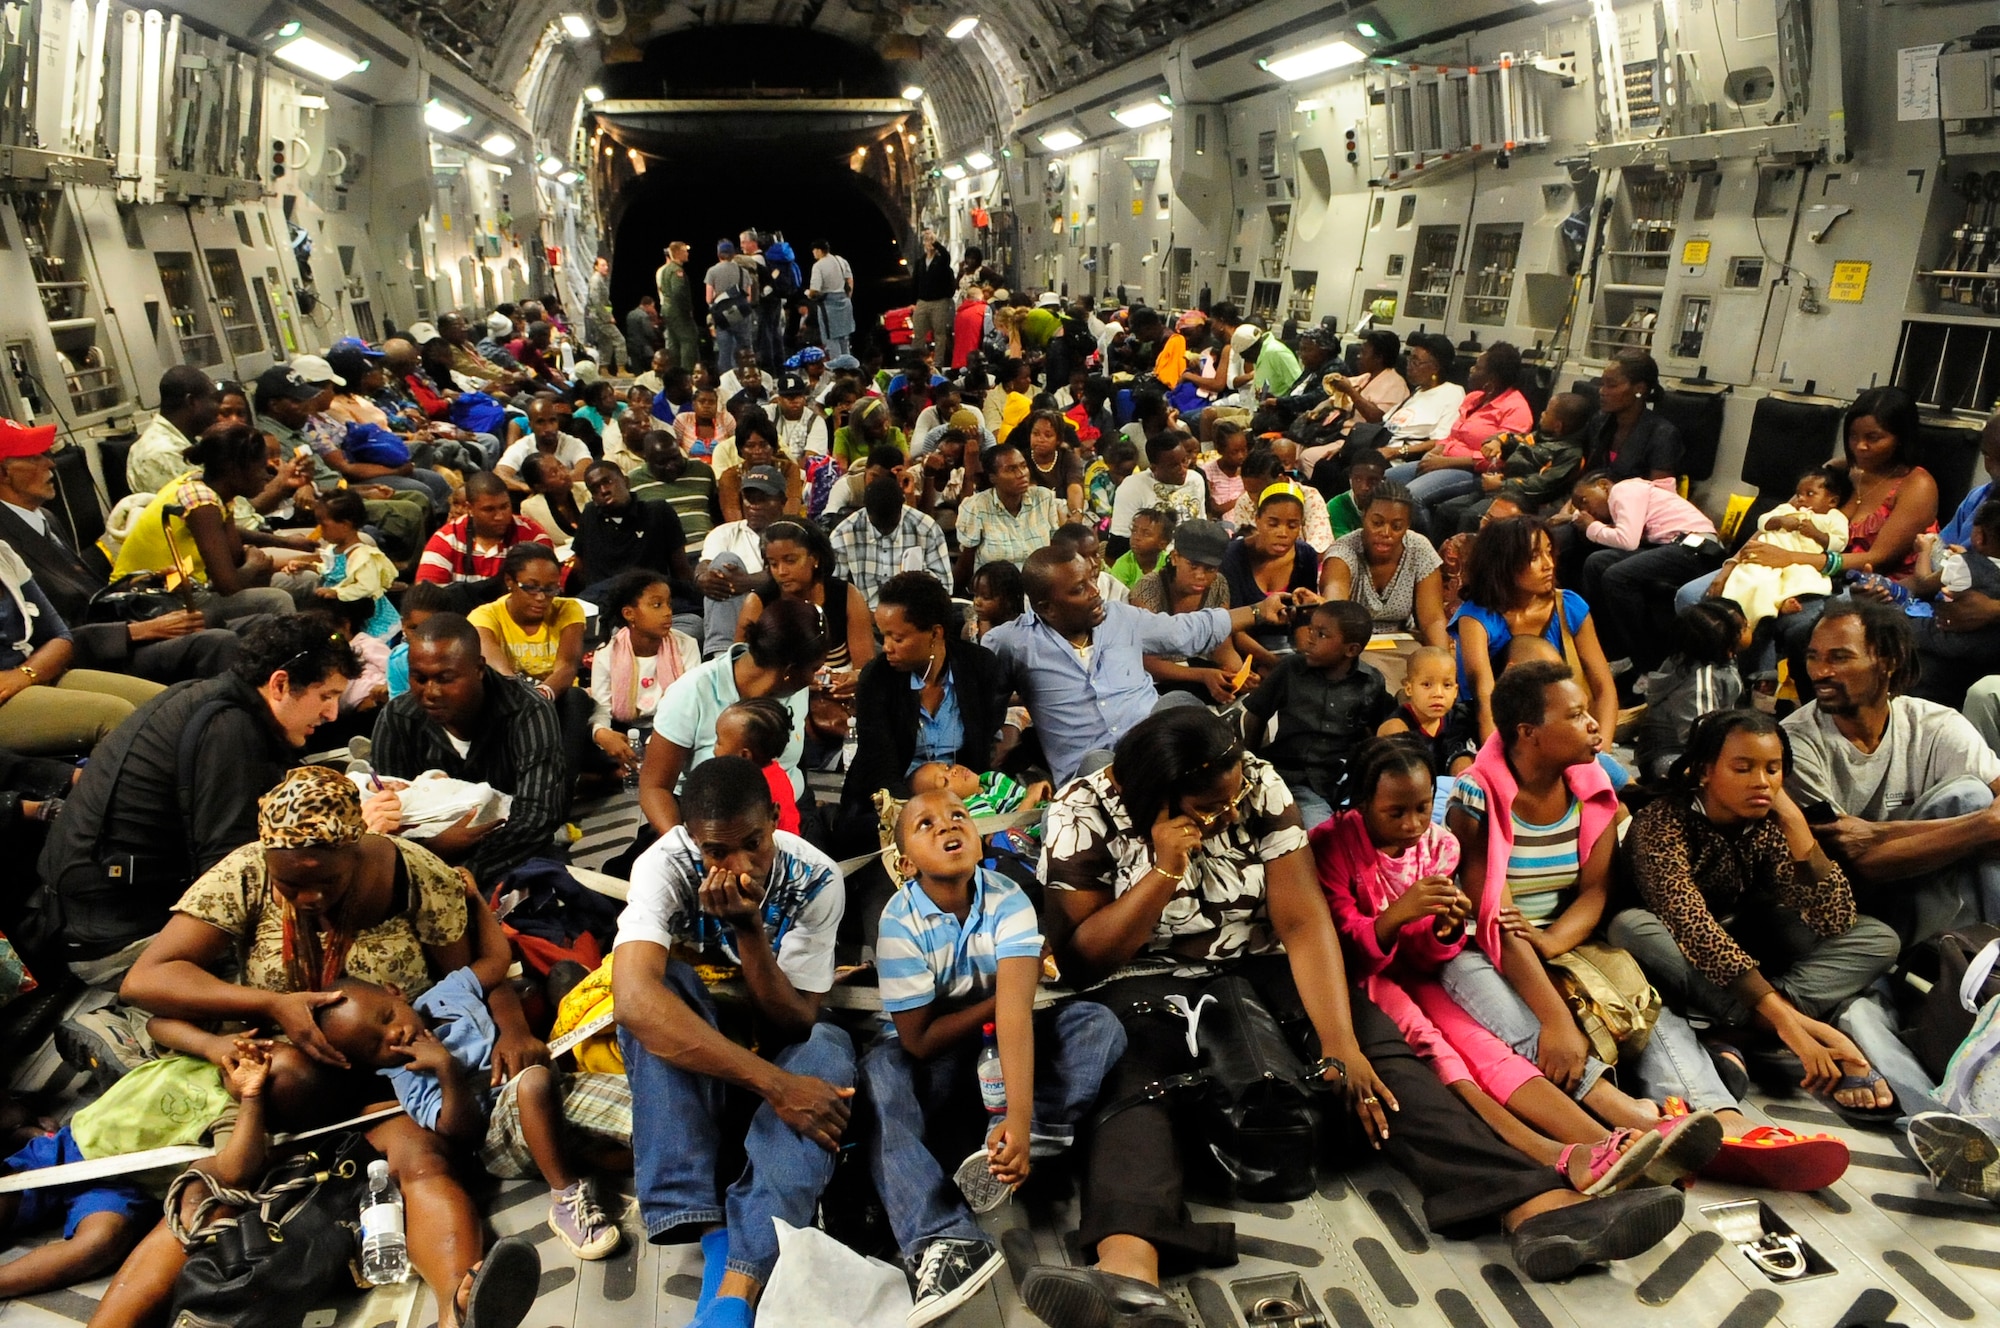 A McChord C-17 Globemaster III is filled with approximately 186 evacuees from Port-Au-Prince, Haiti.  The McChord aircrew airlifted the evacuees to Orlando International Airport in Orlando, Fla. from Toussaint L’Ouventure International Airport Sunday. (U.S. Air Force photo/Master Sgt. Chris Haylett)